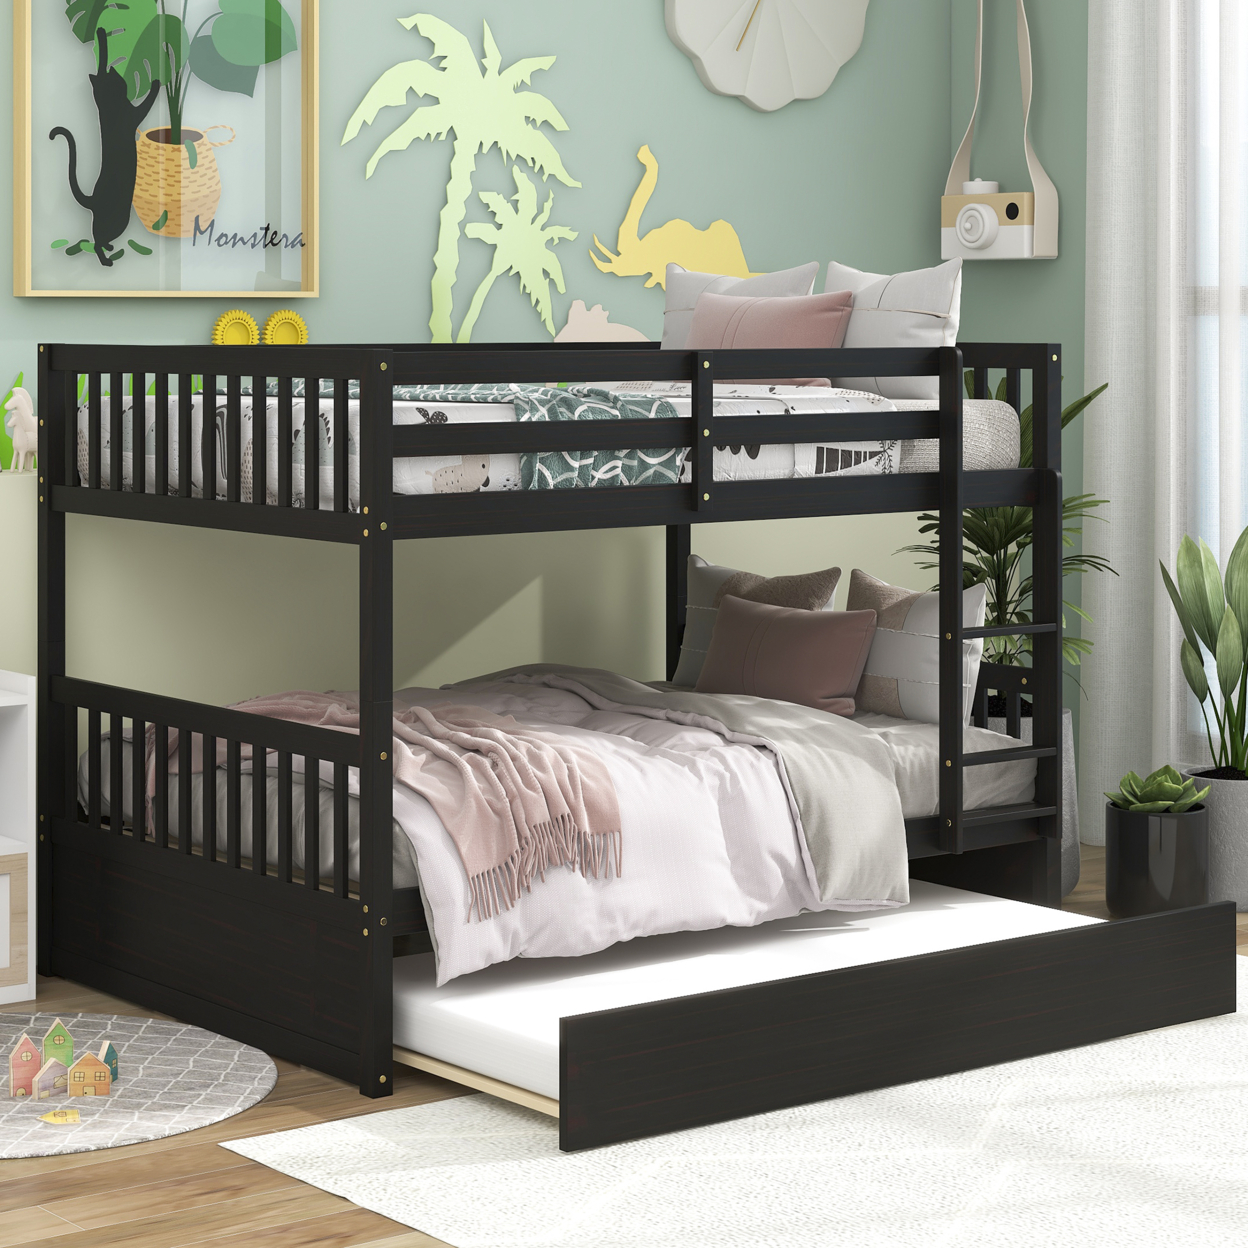 Full Over Full Bunk Bed with Trundleï¿½ï¿½Espresso